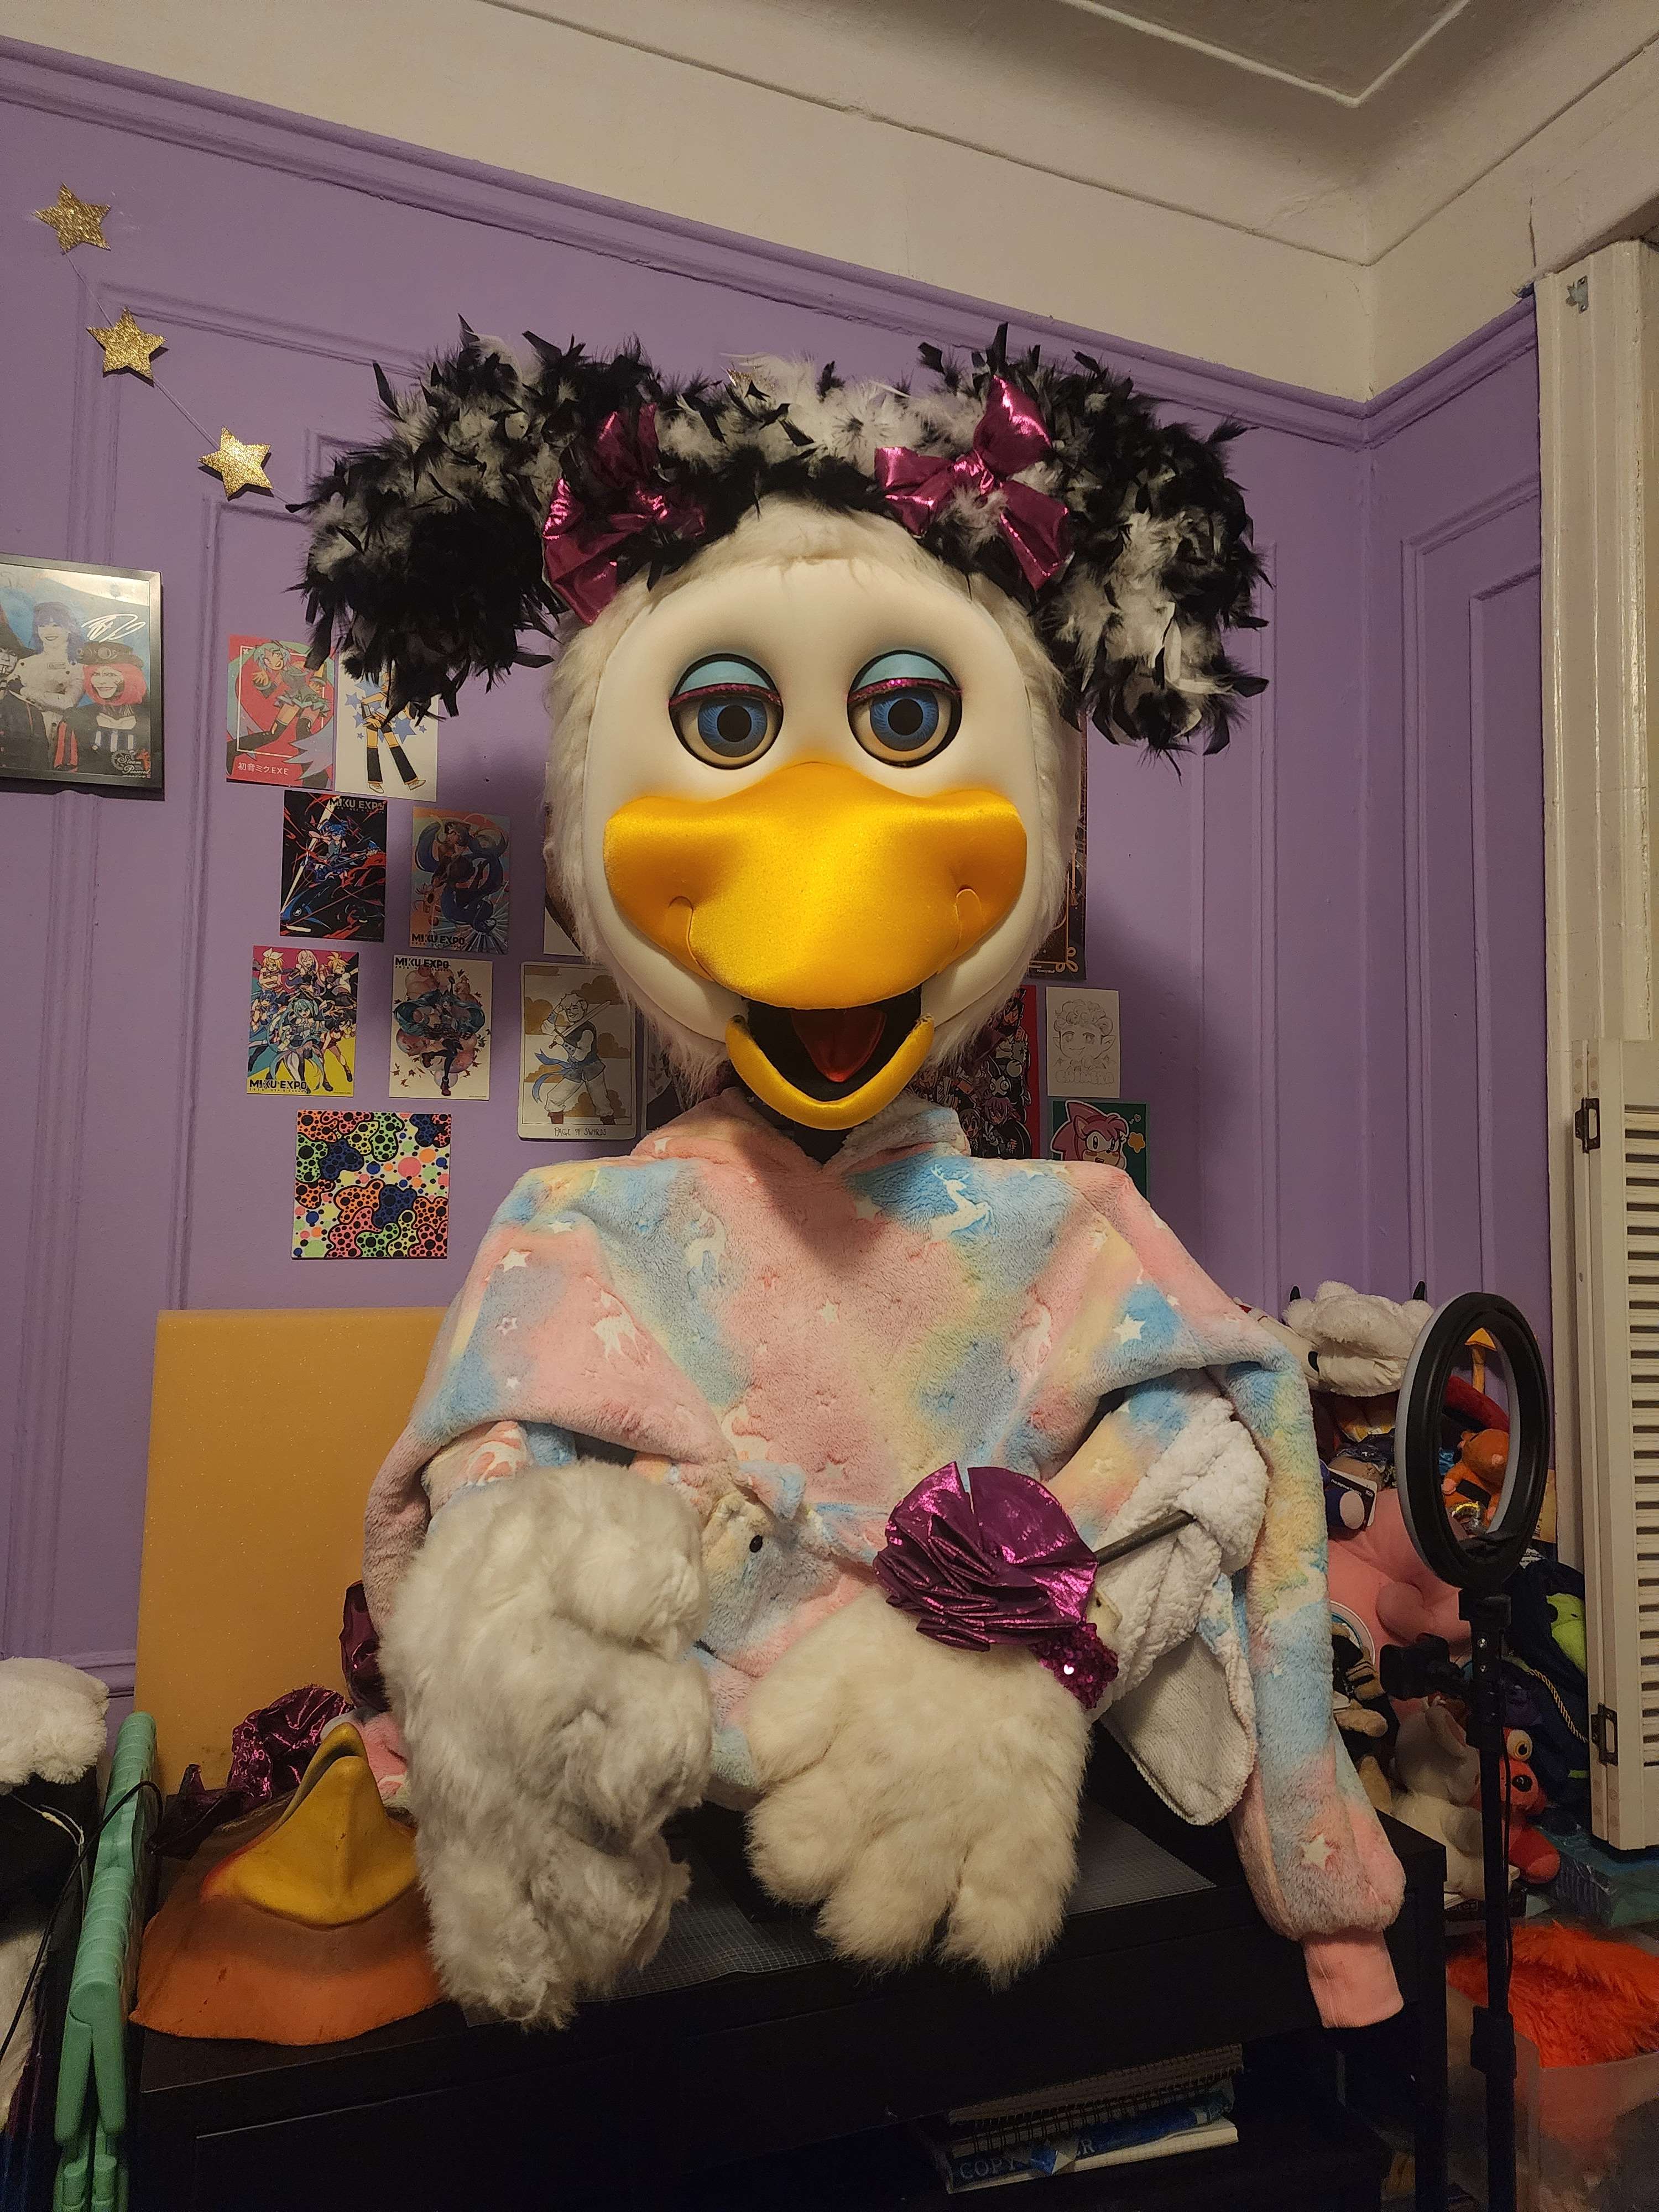 my helen animatronic. she's sitting on a black desk in front of a purple wall covered with art. she has a pastel pink and blue snuggie draped over her shoulders.